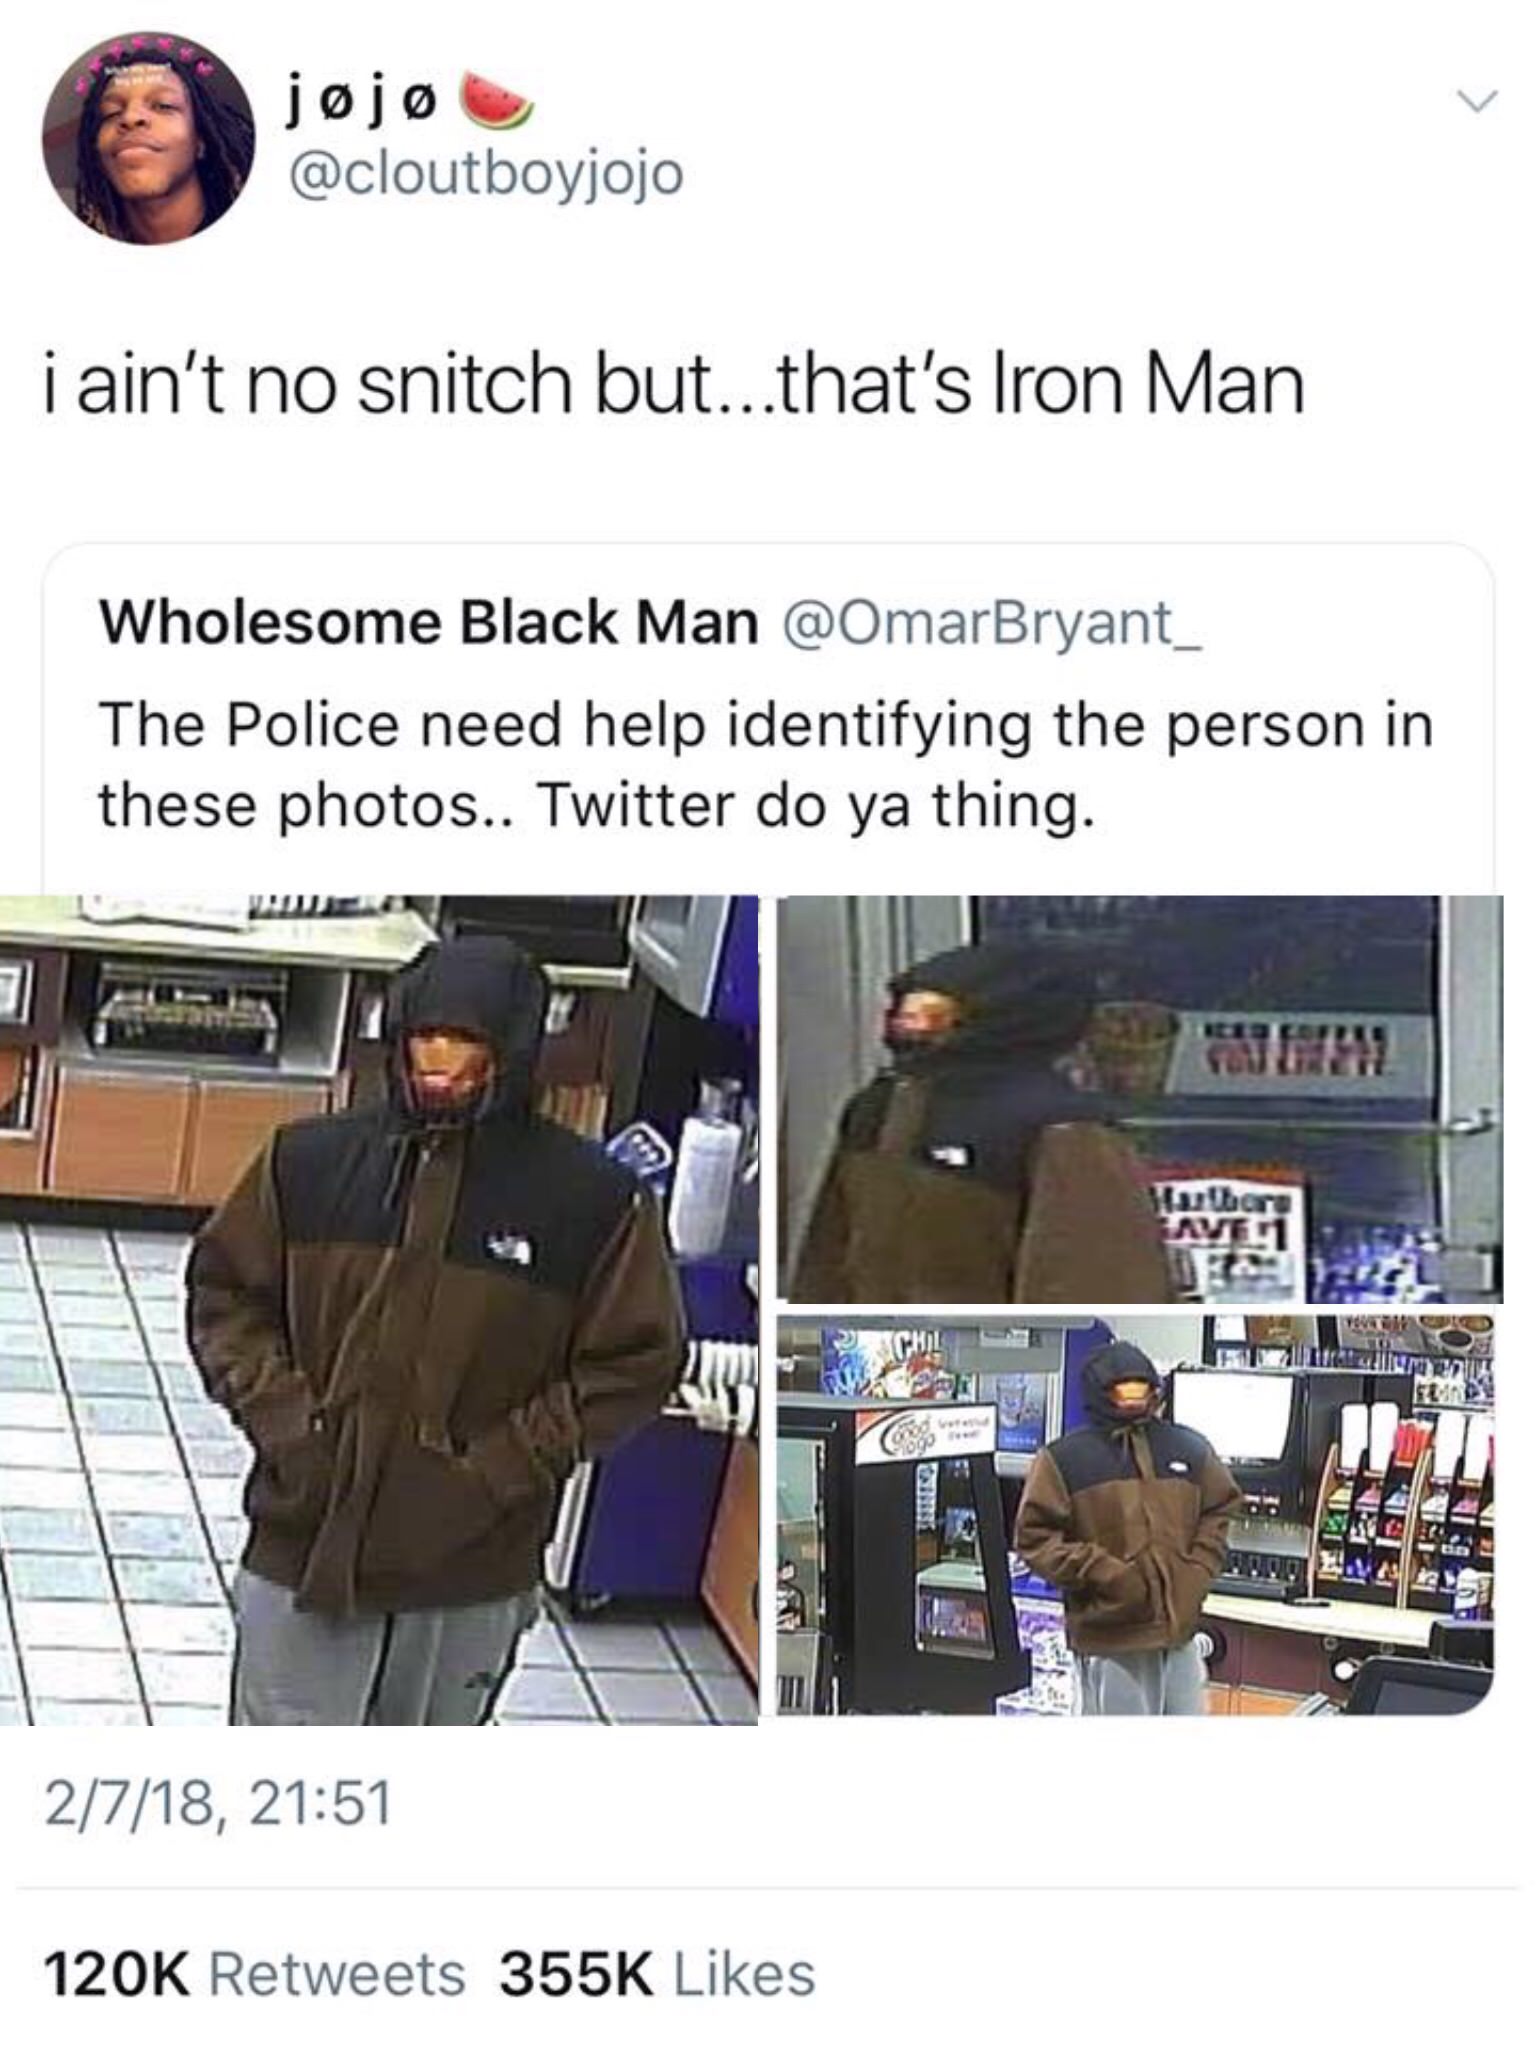 ain t no snitch but that's iron man - jj i ain't no snitch but...that's Iron Man Wholesome Black Man The Police need help identifying the person in these photos.. Twitter do ya thing. Vw Te Chile D Ui 2718,